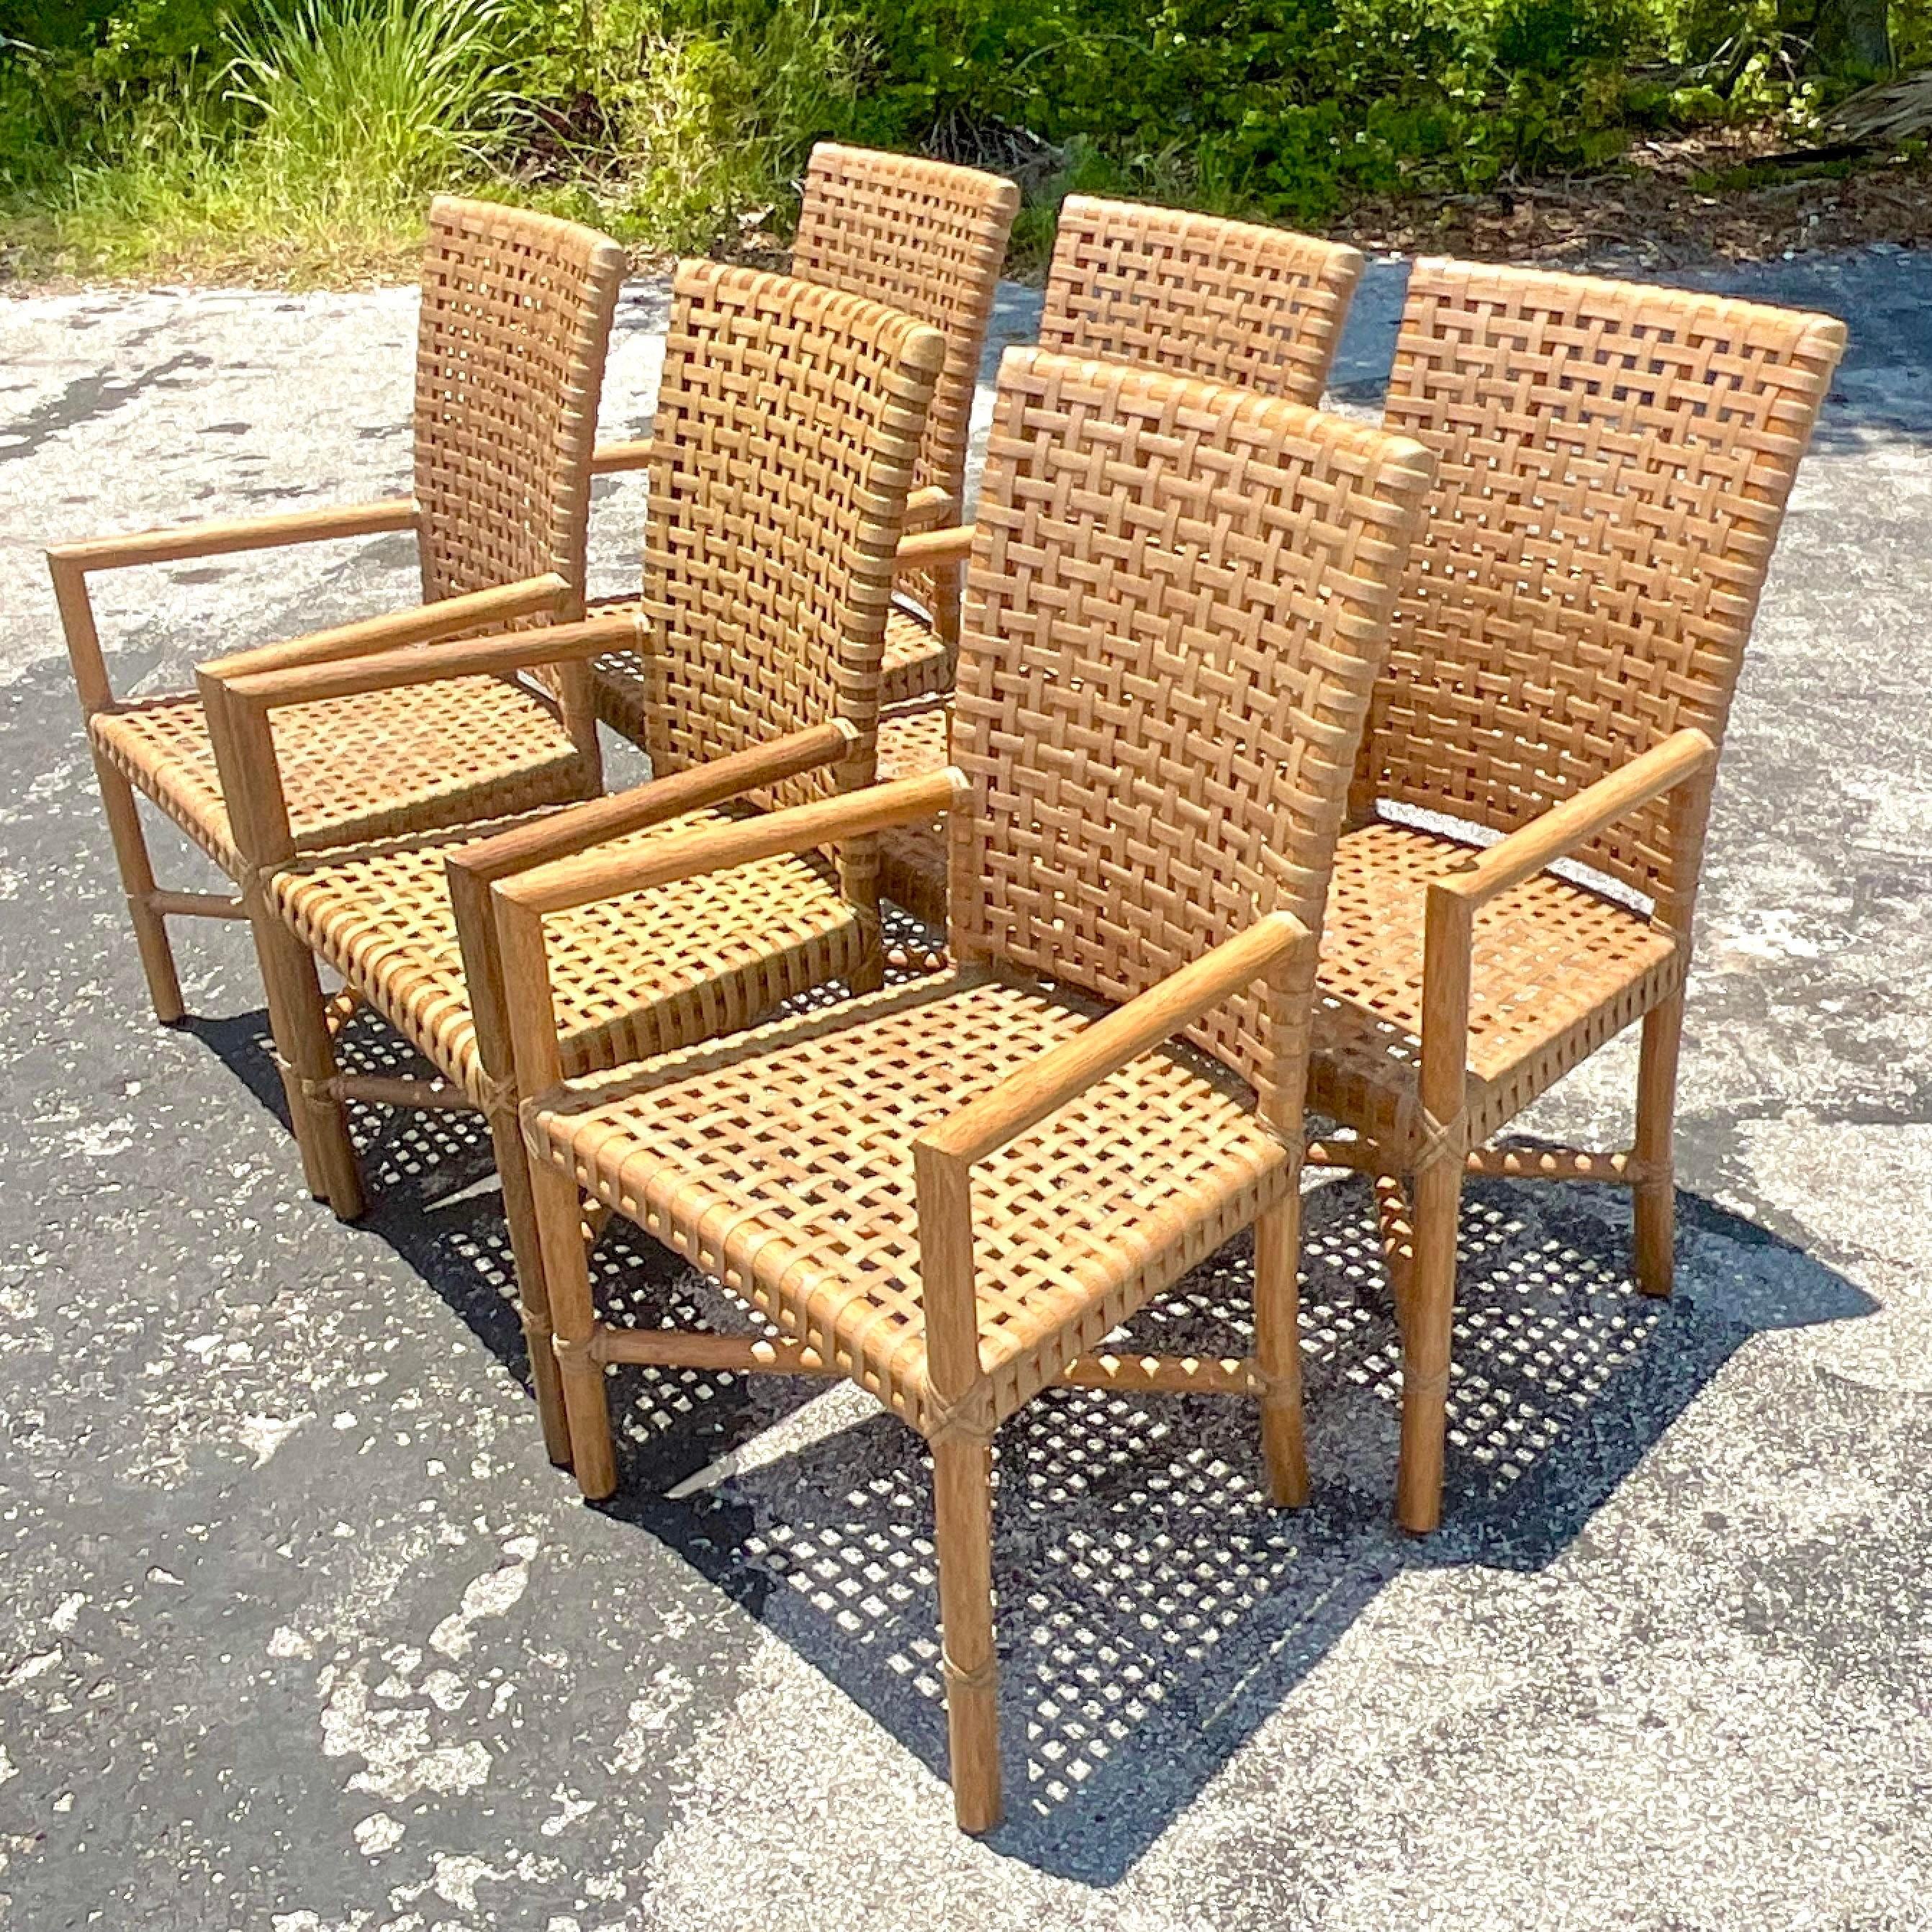 An extraordinary set of six vintage Coastal dining chairs. Made by the iconic McGuire group. Six stylish arm chairs with chic woven rawhide seats. Tagged on the bottom. Acquired from a Palm Beach estate.